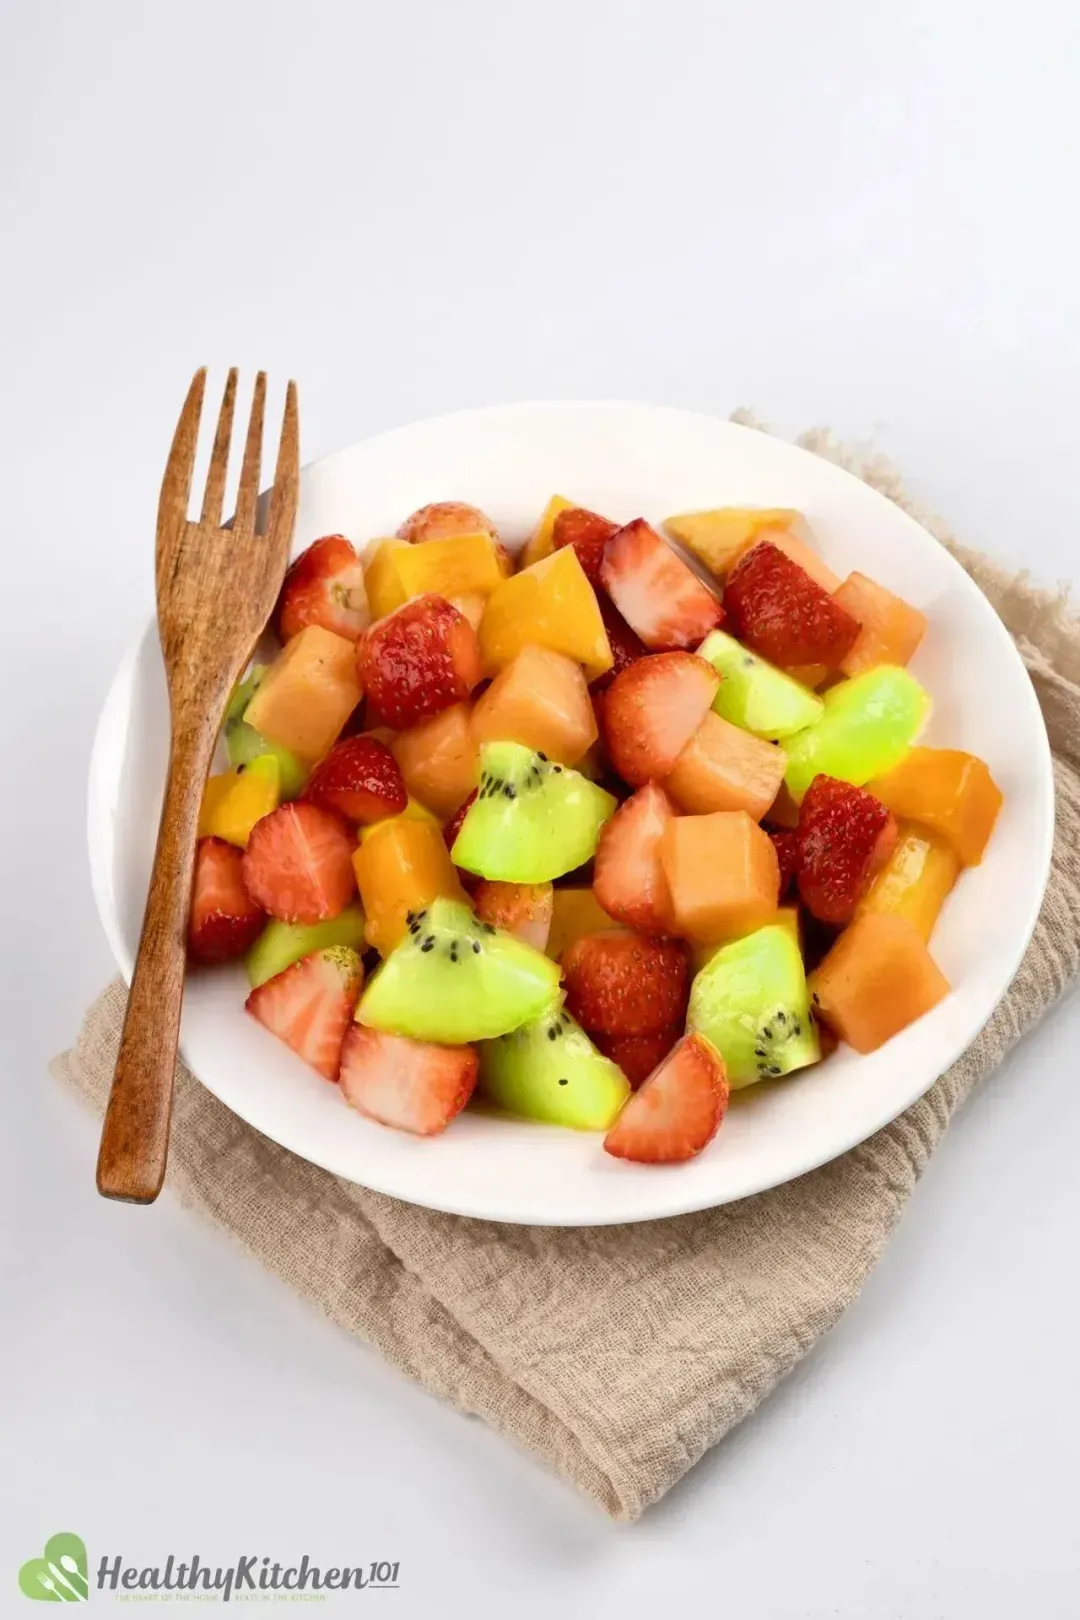 A white bowl of fruit salad with strawberries, mangoes, and kiwis on a white table.